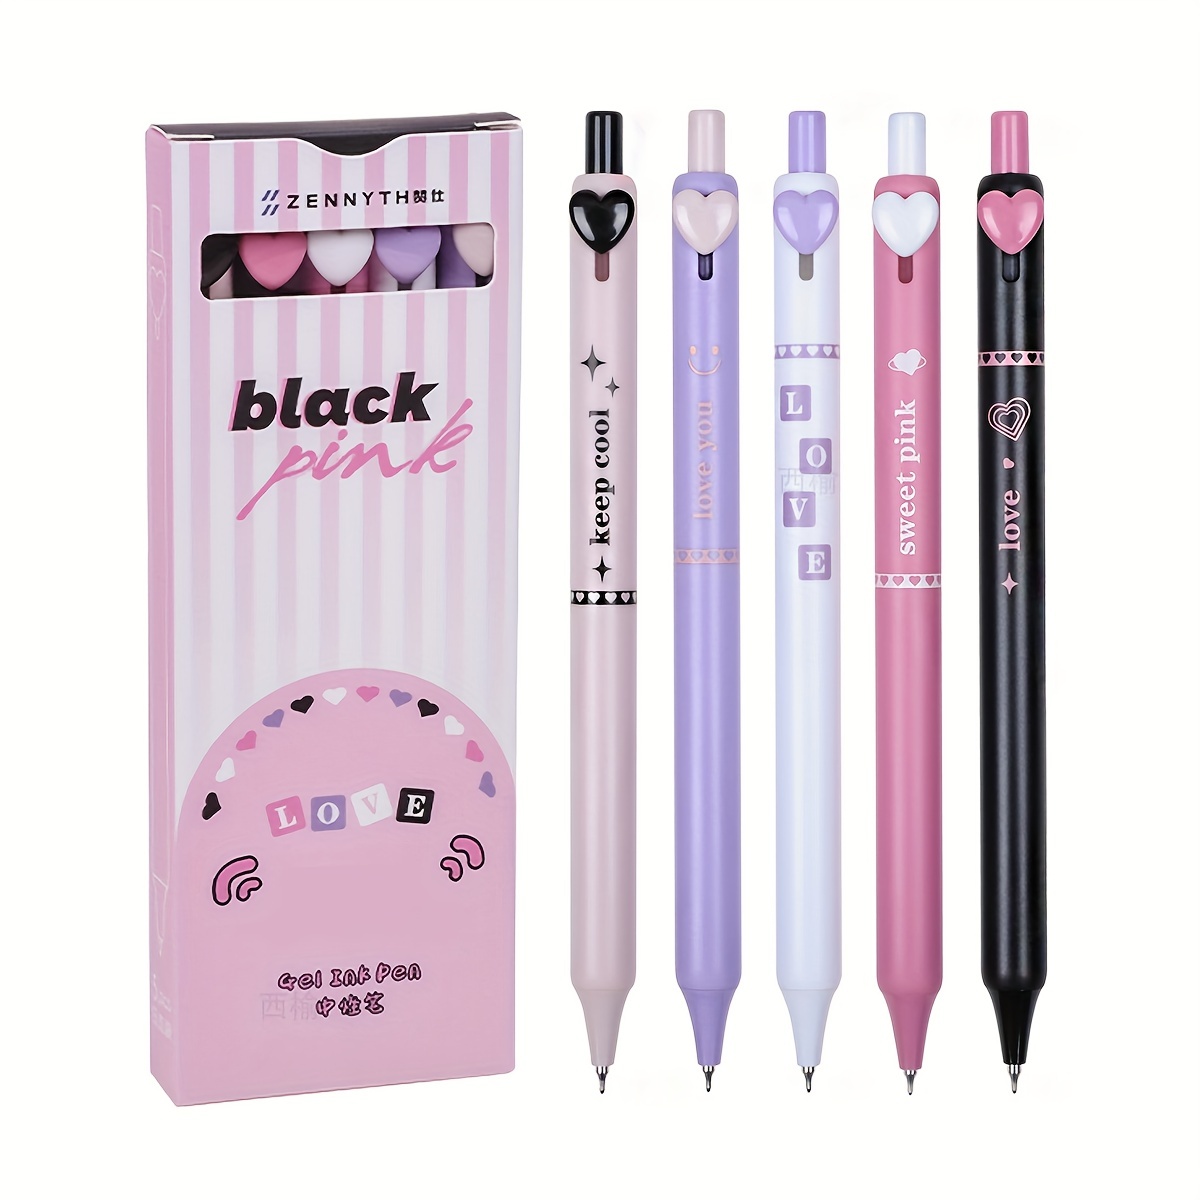 Cute Pens Kawaii 0.5mm Black Ink Gel Pens Fine Point Smooth Writing Ballpoint for Office School Supplies Nice Fun Gifts for Kids Girls Women Pens for